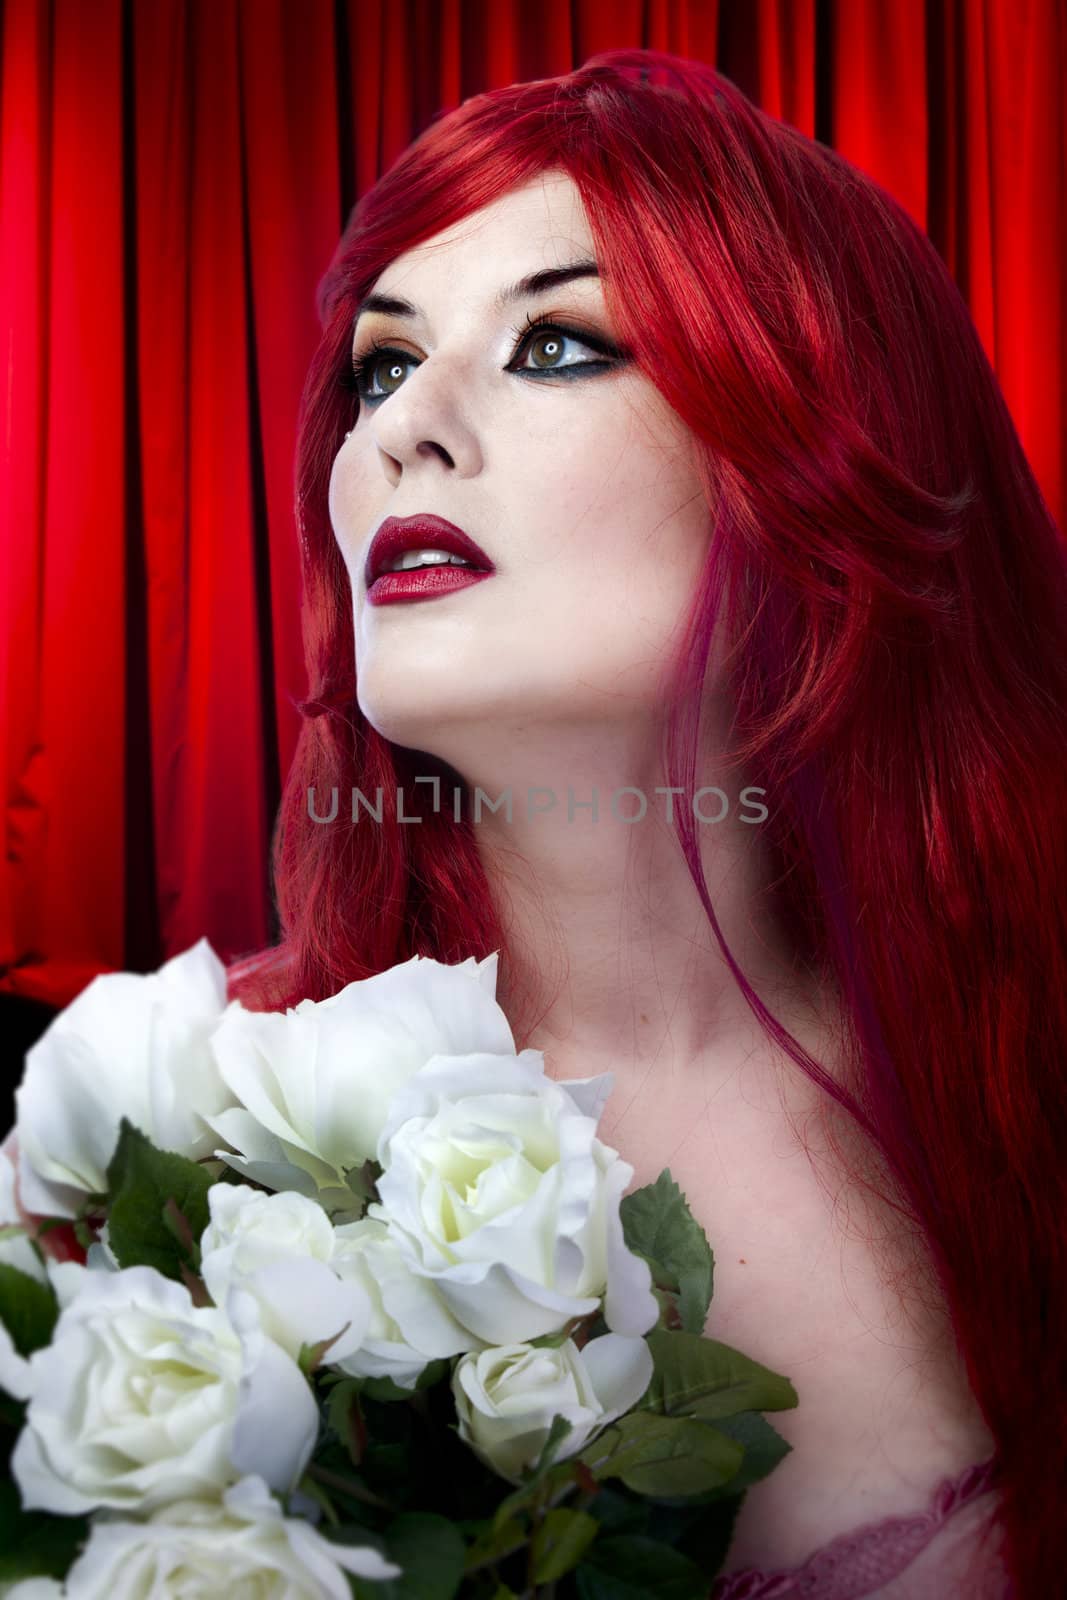 Young model with whites roses over cabaret background